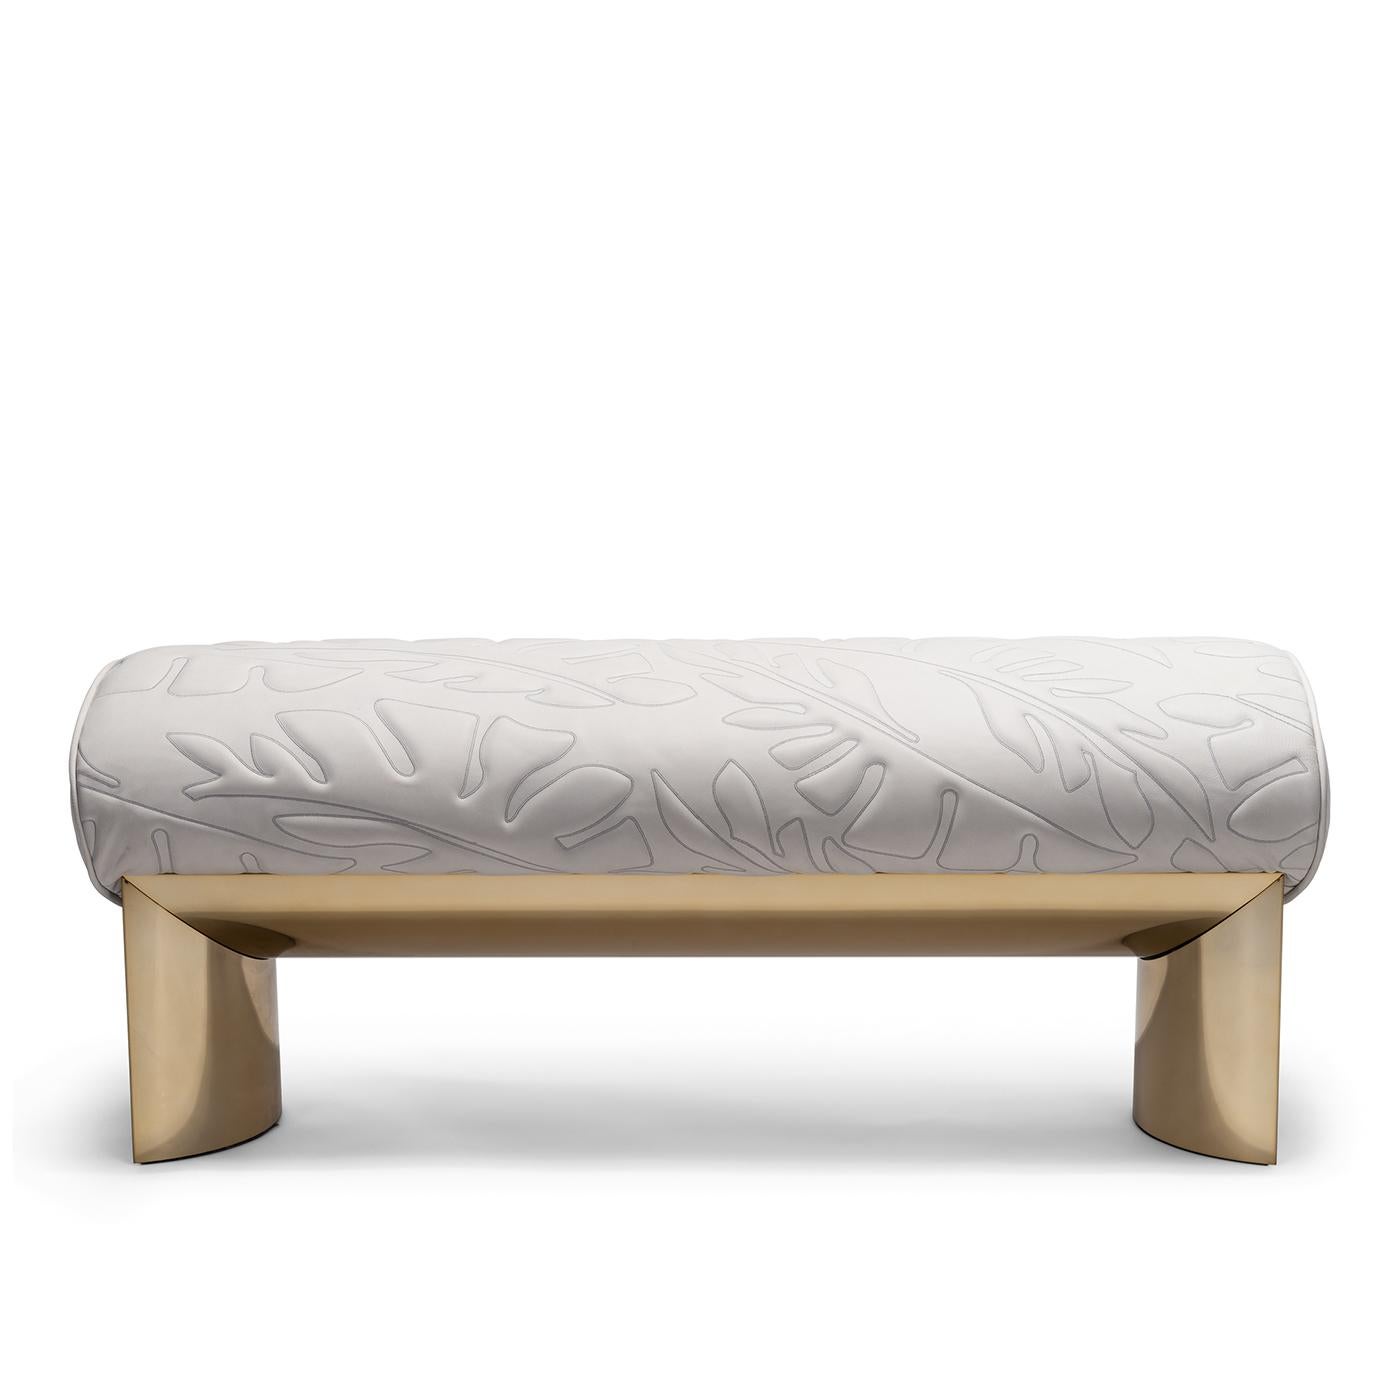 Bench Veneziana with stainless polished steel structure in gold finish 
with concave sides shaped in solid polished light grey marble. Upholstered 
and covered with high quality italian genuine white leather with palms pattern.
Also available with